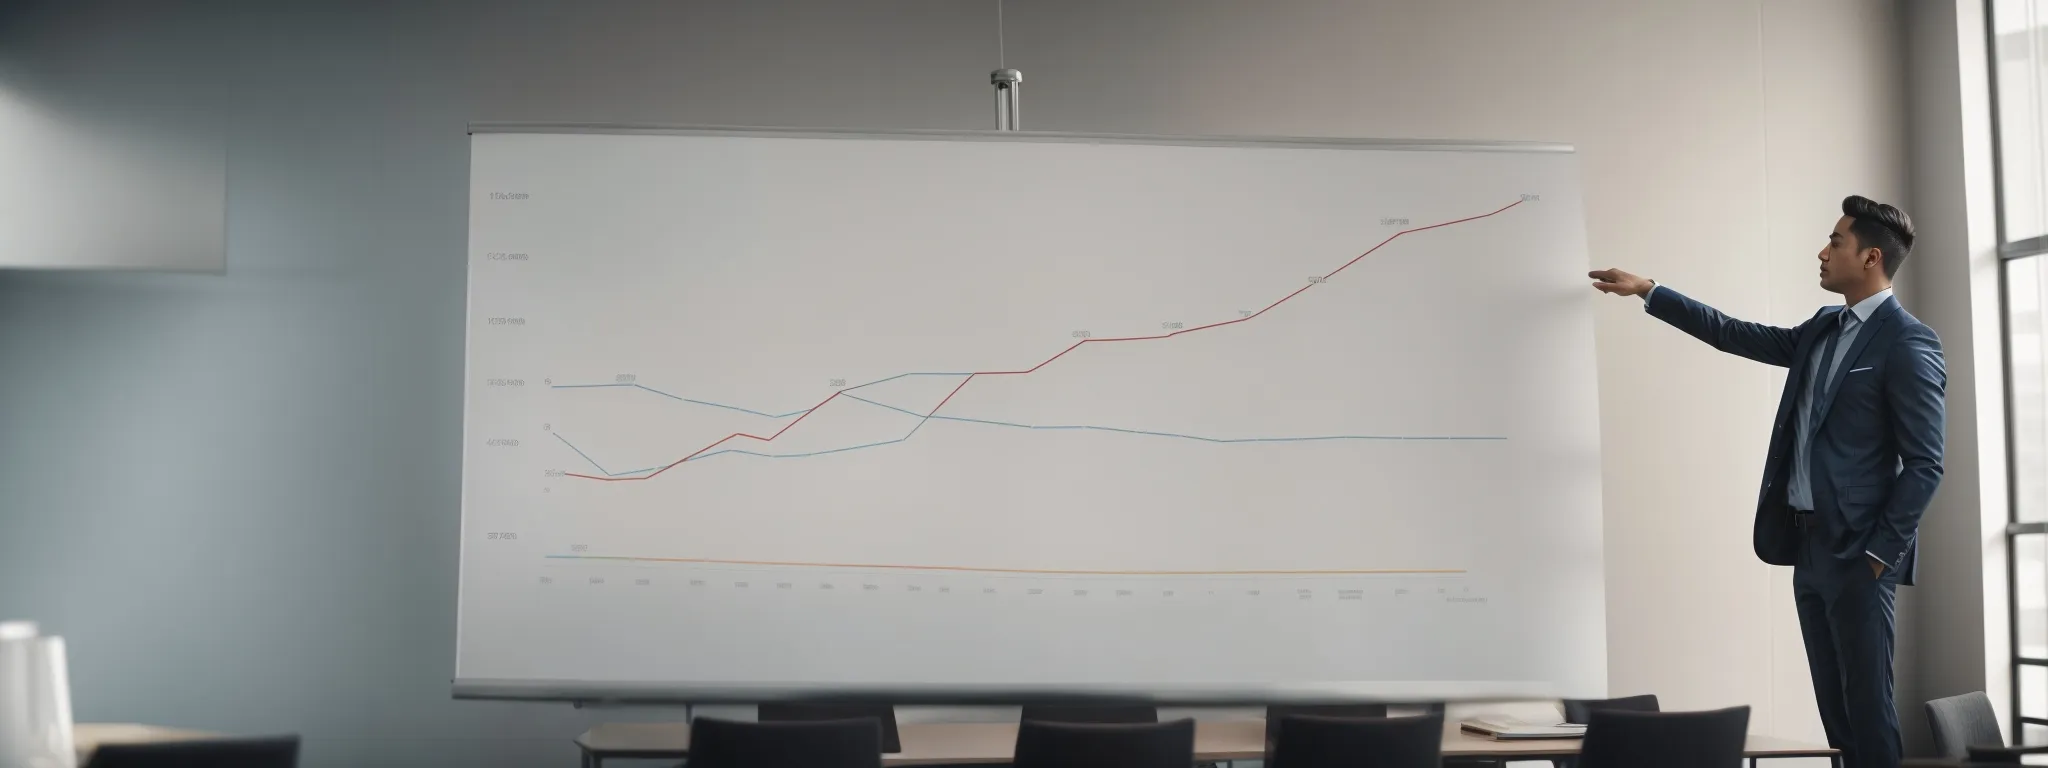 a confident individual points to a vibrant growth chart during a presentation in a modern meeting room.